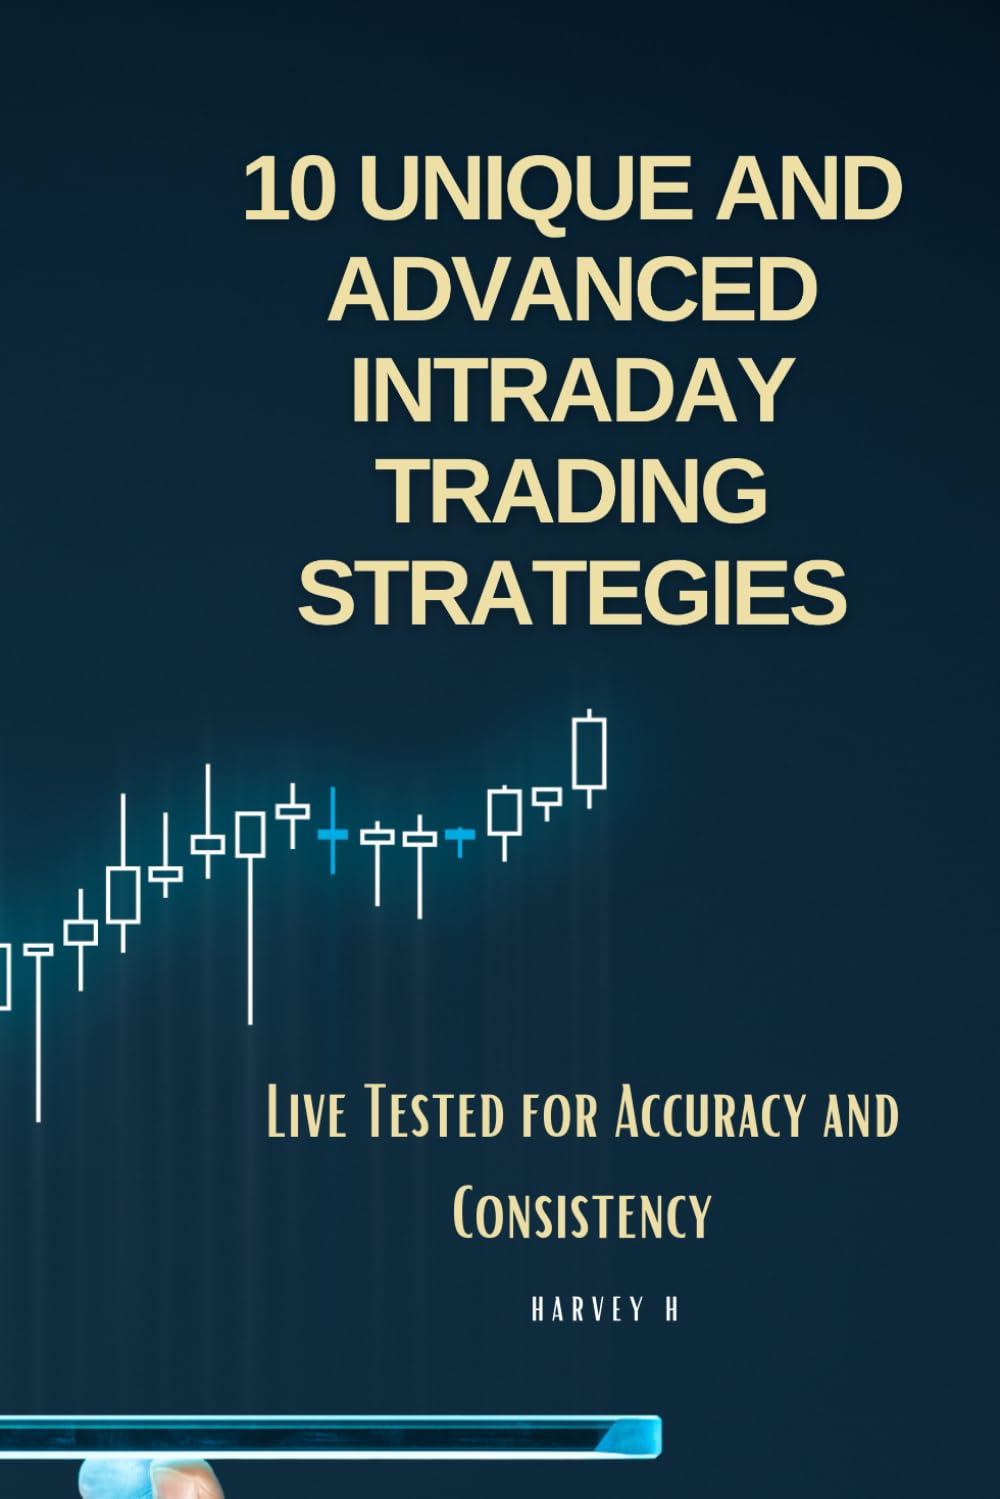 10 Unique And Advanced Intraday Trading Strategies Live Tested For Accuracy And Consistency